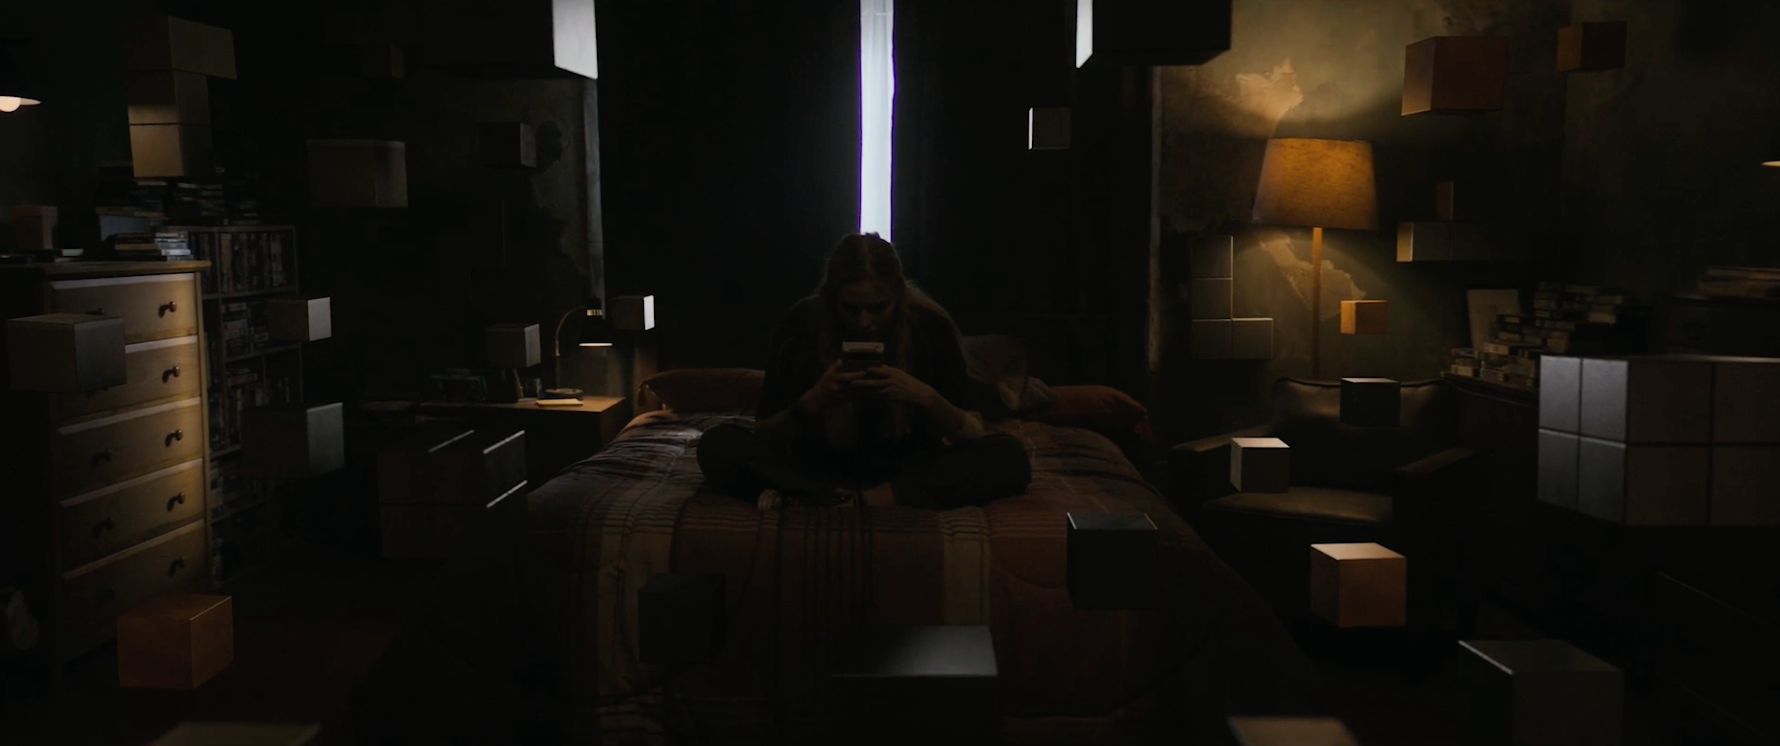 A person sits on a bed in a dimly-lit room with floating cubes surrounding them, concentrating on a handheld device. There is a lamp on the bedside table